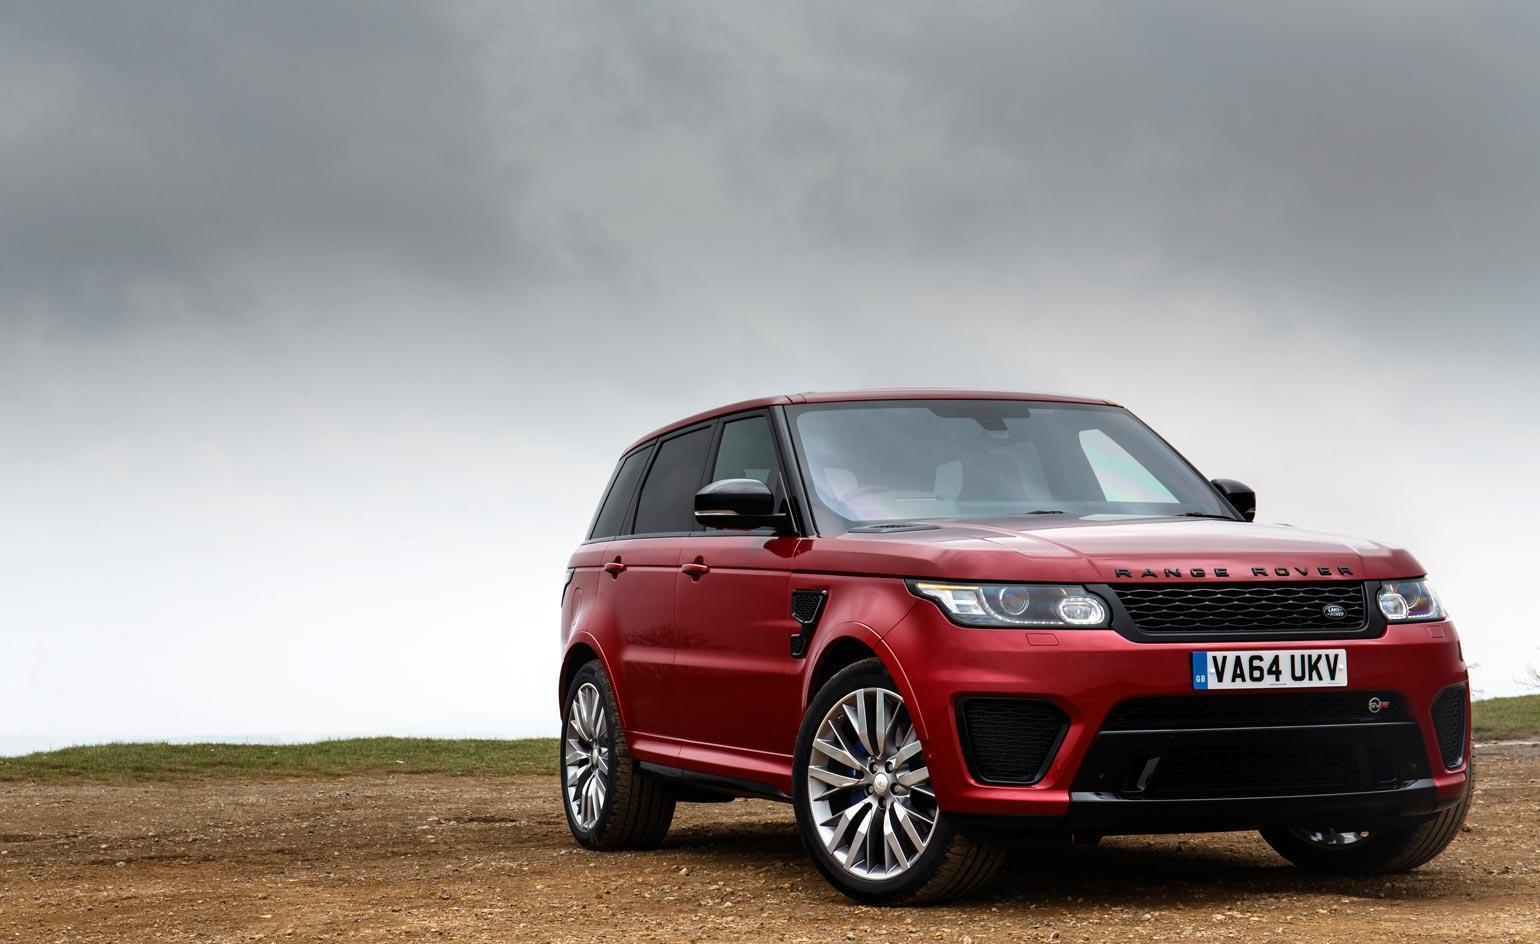 Mighty machines: Range Rover launches Sport SVR and Hybrid models